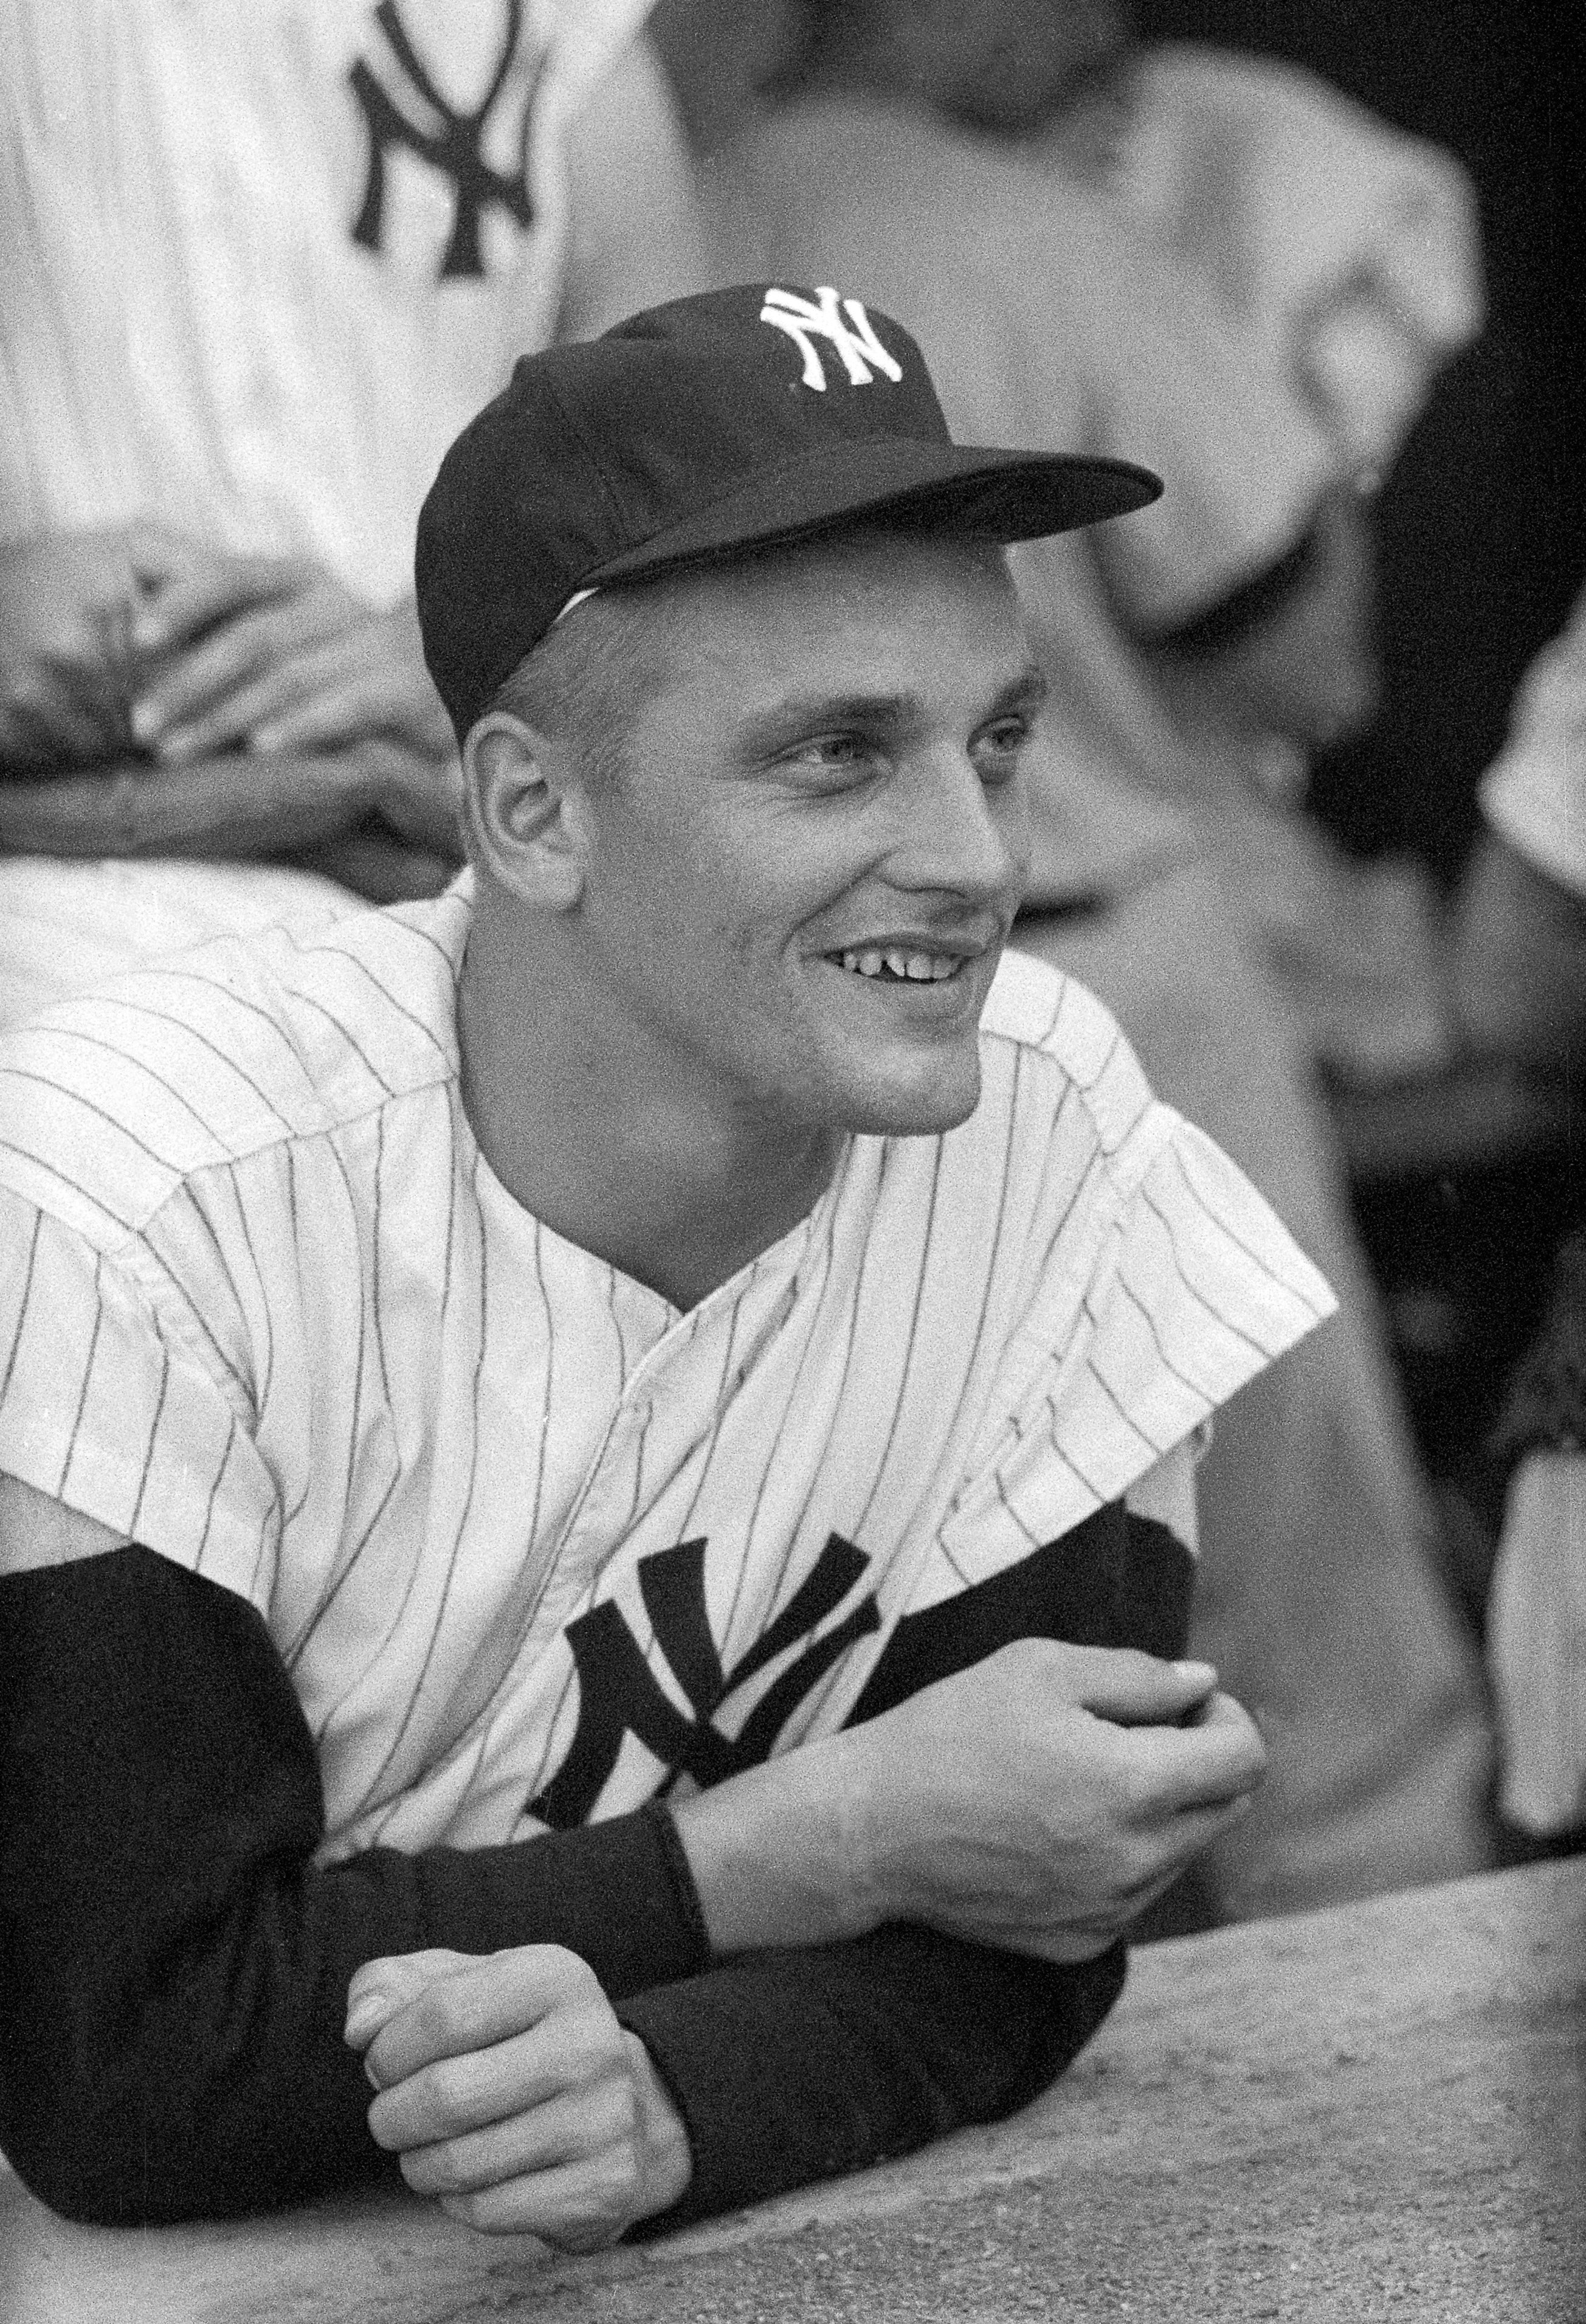 In 1984 Rogers Yankees Number #9 was - Roger Maris Fans